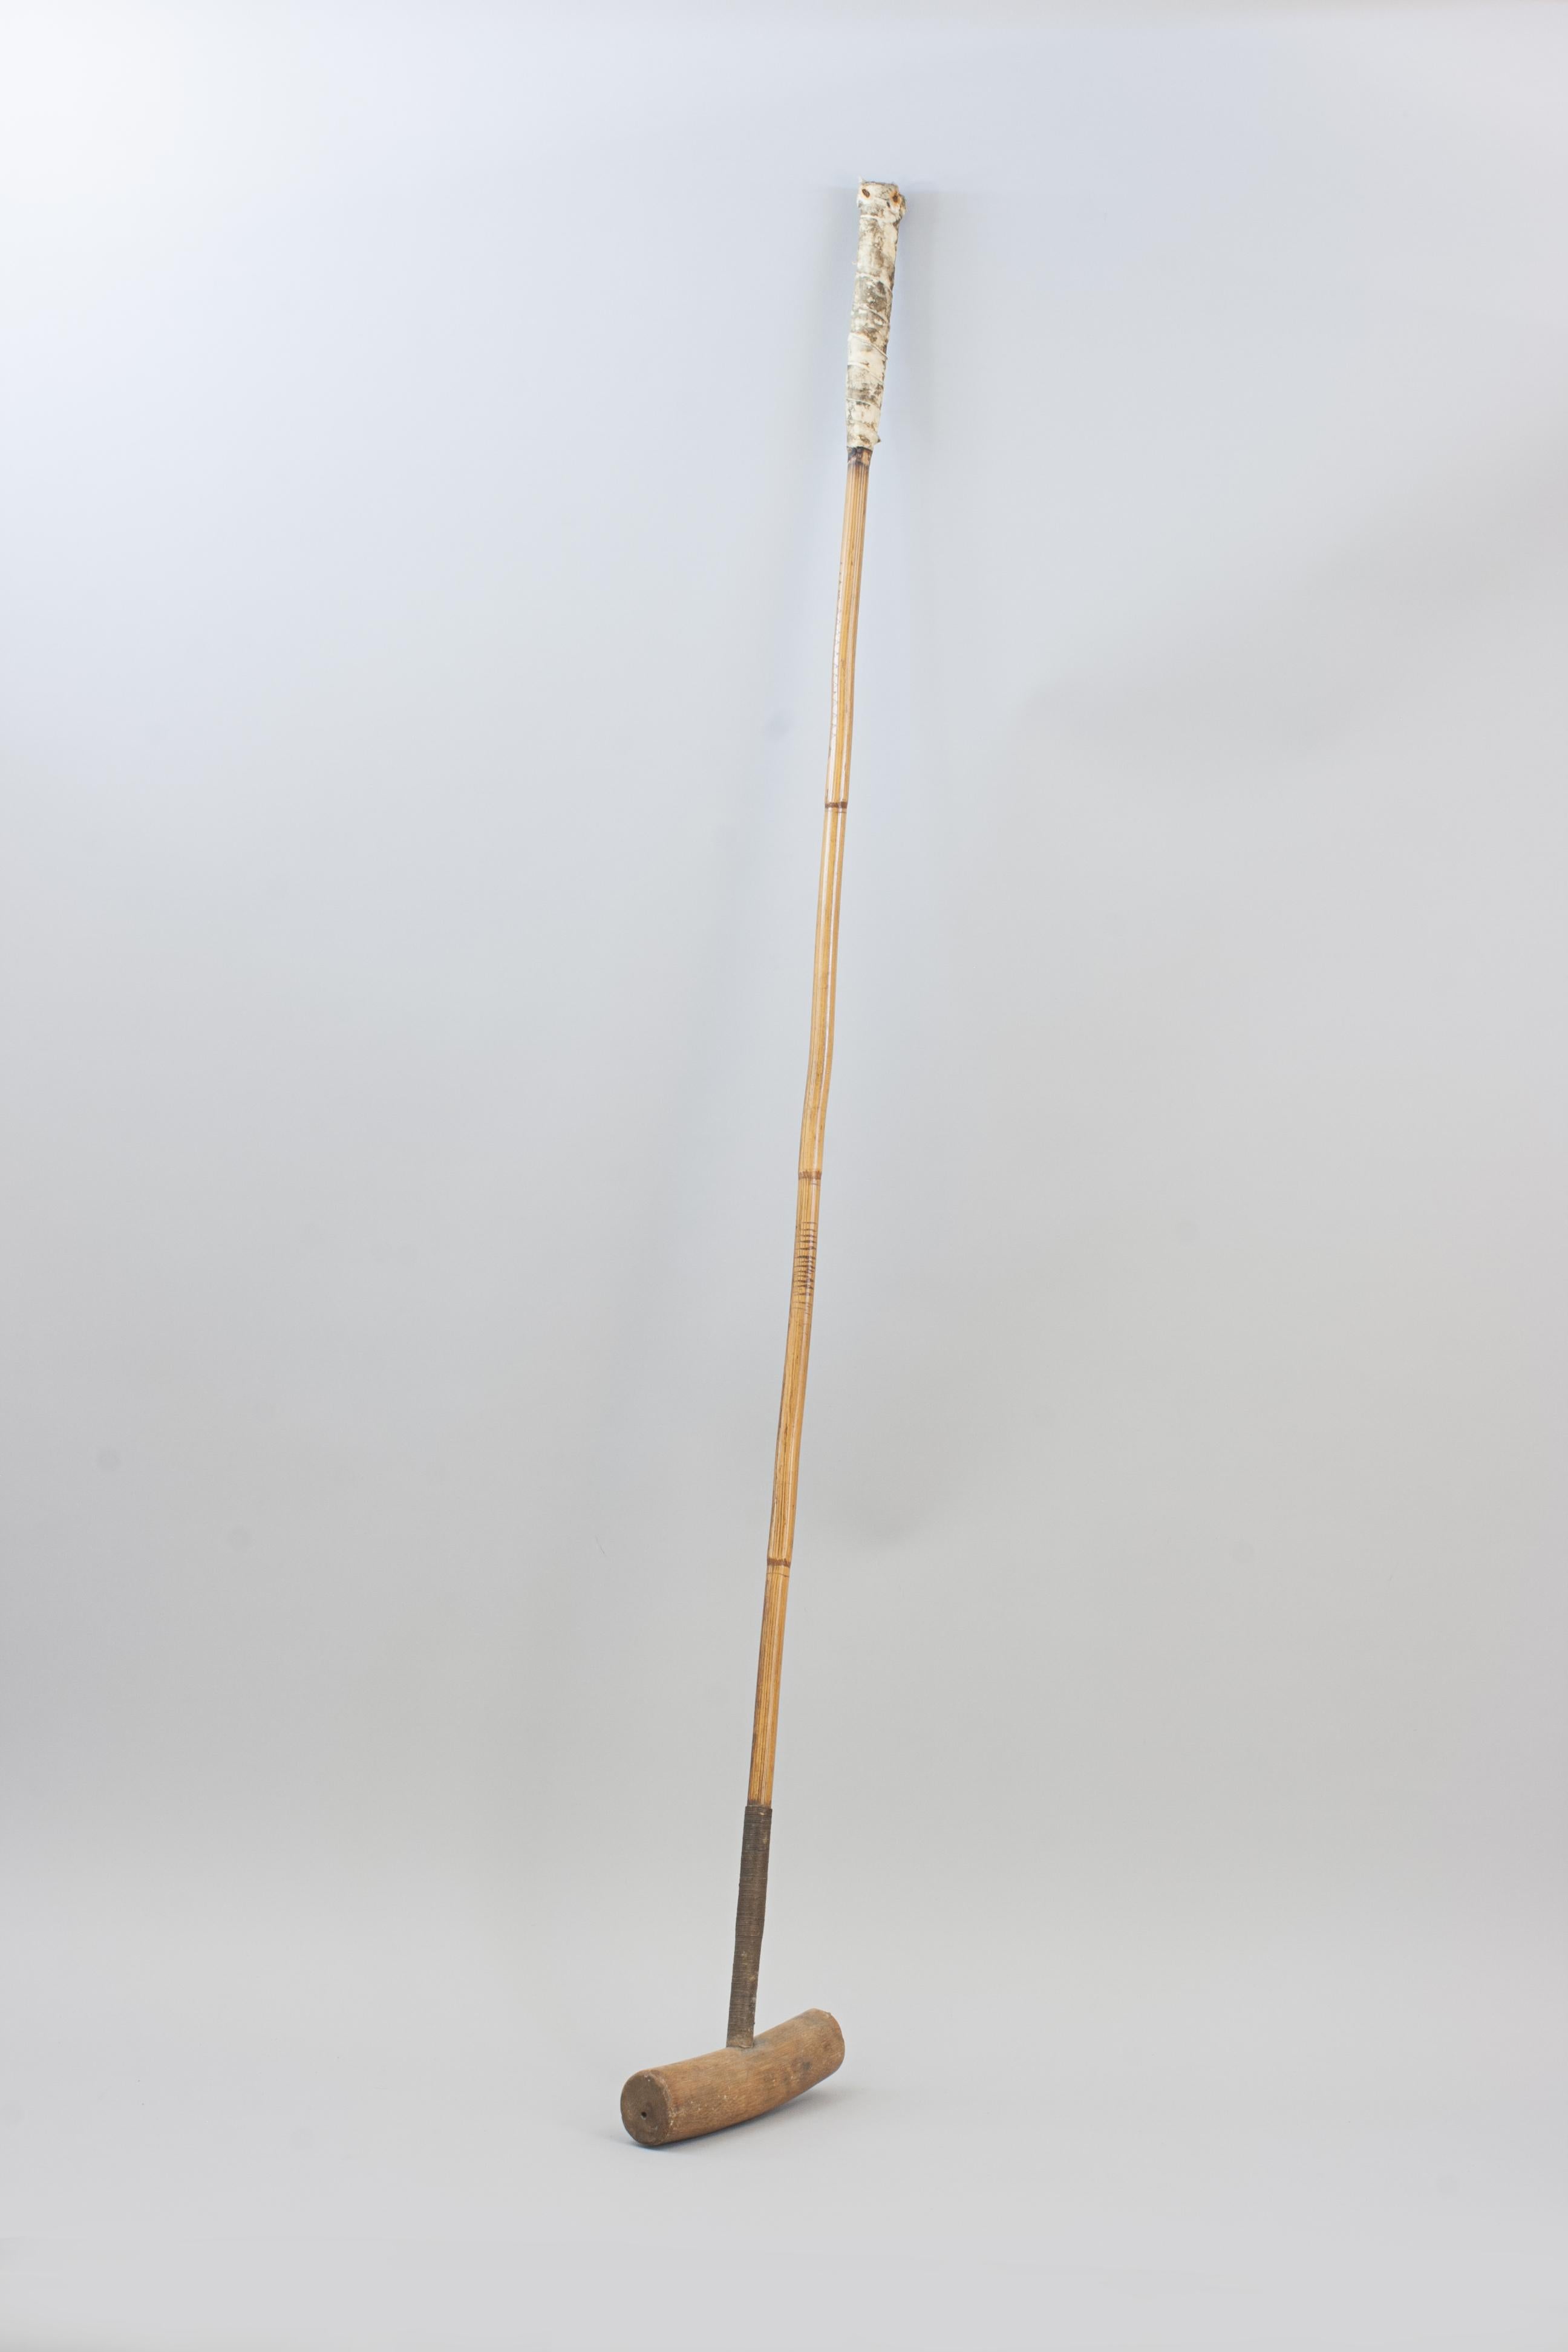 Early Vintage Polo Mallet, J. Salter.
A good late 19th century polo mallet with a round bamboo root head with original rattan, mallacca cane bamboo shaft with original handle made by James Salter & Son, Aldershot, No. 52. It has a round makers stamp